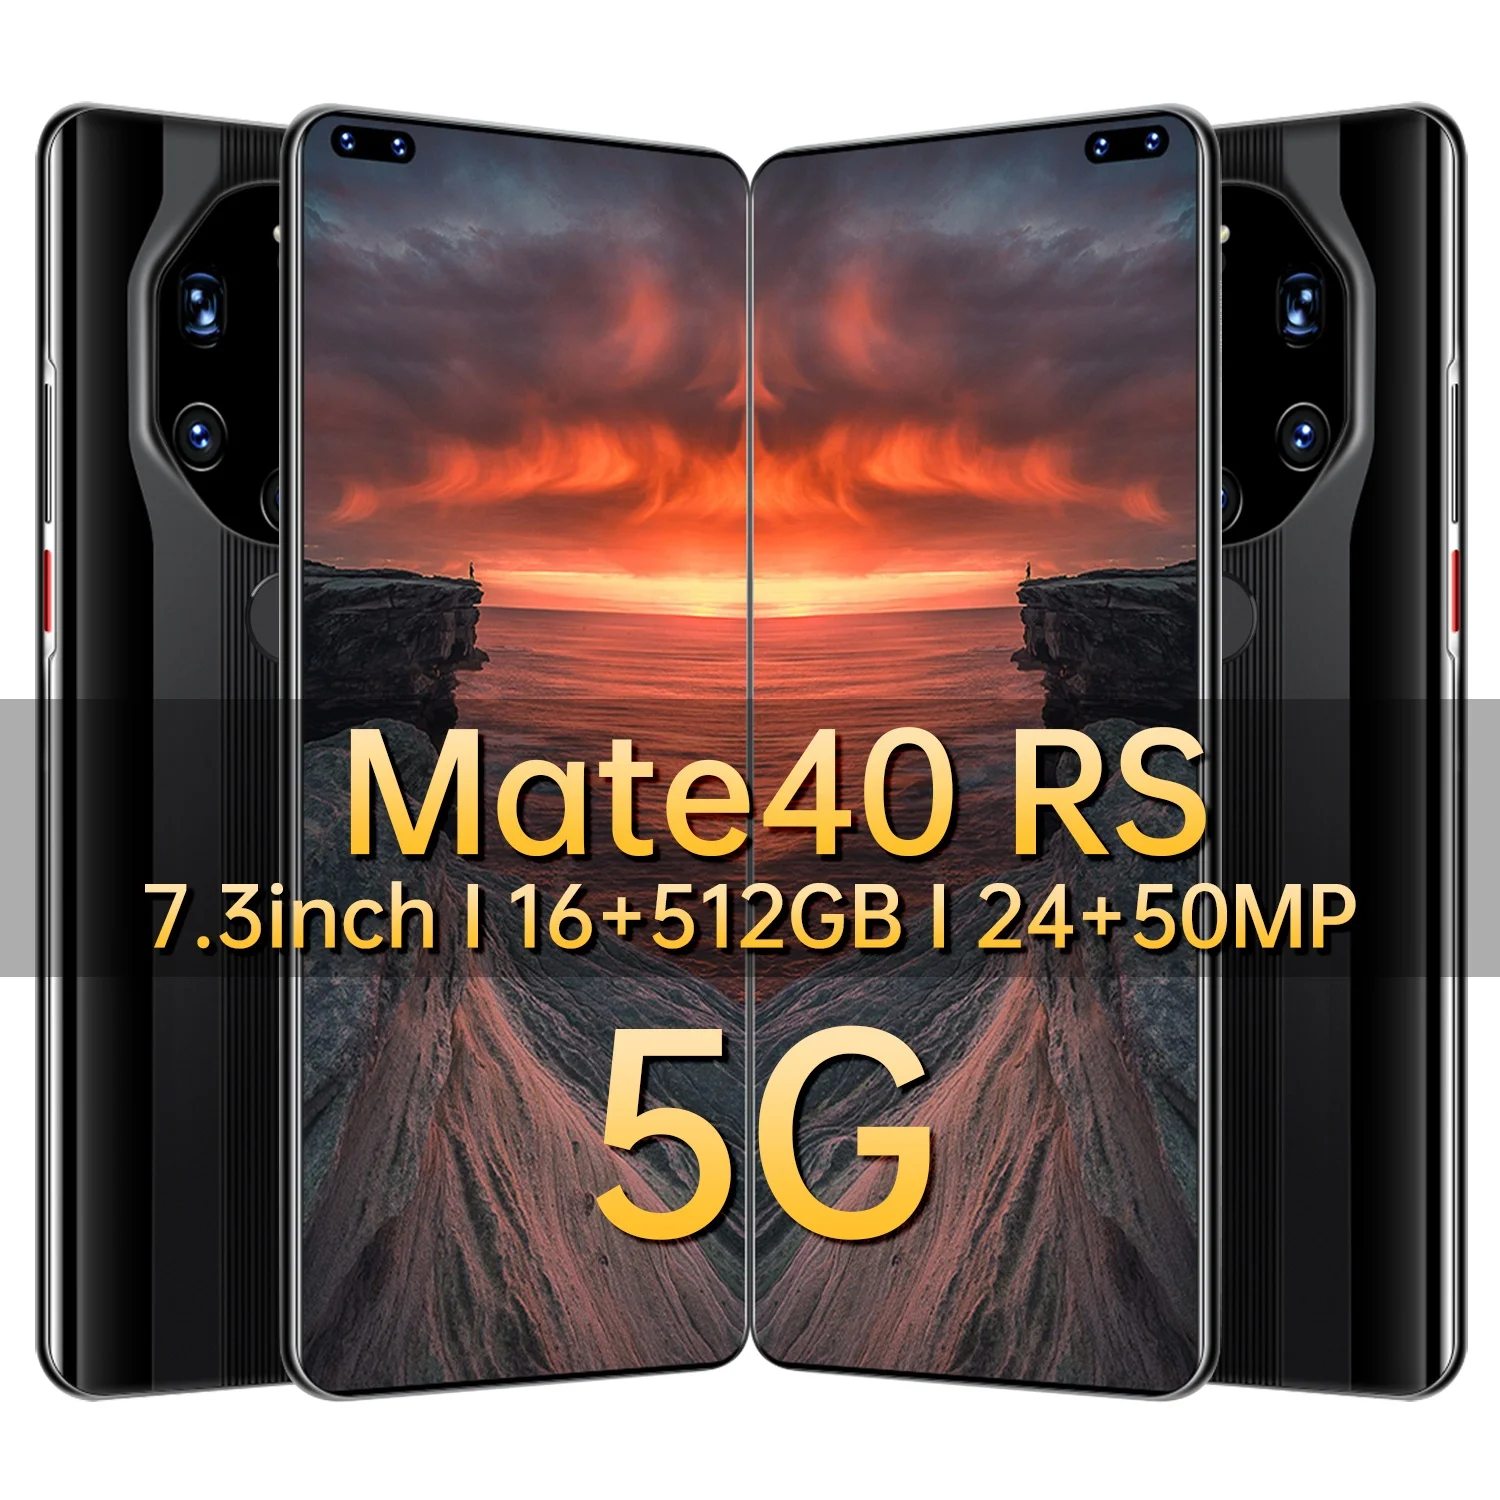 

Global Version 7.3 Inch Mate40 Rs 16GB RAM 512GB ROM 24+48MP Andriod 10 Smartphones MTK6889 Dual SIM 4G LTE 5G Cell Phone